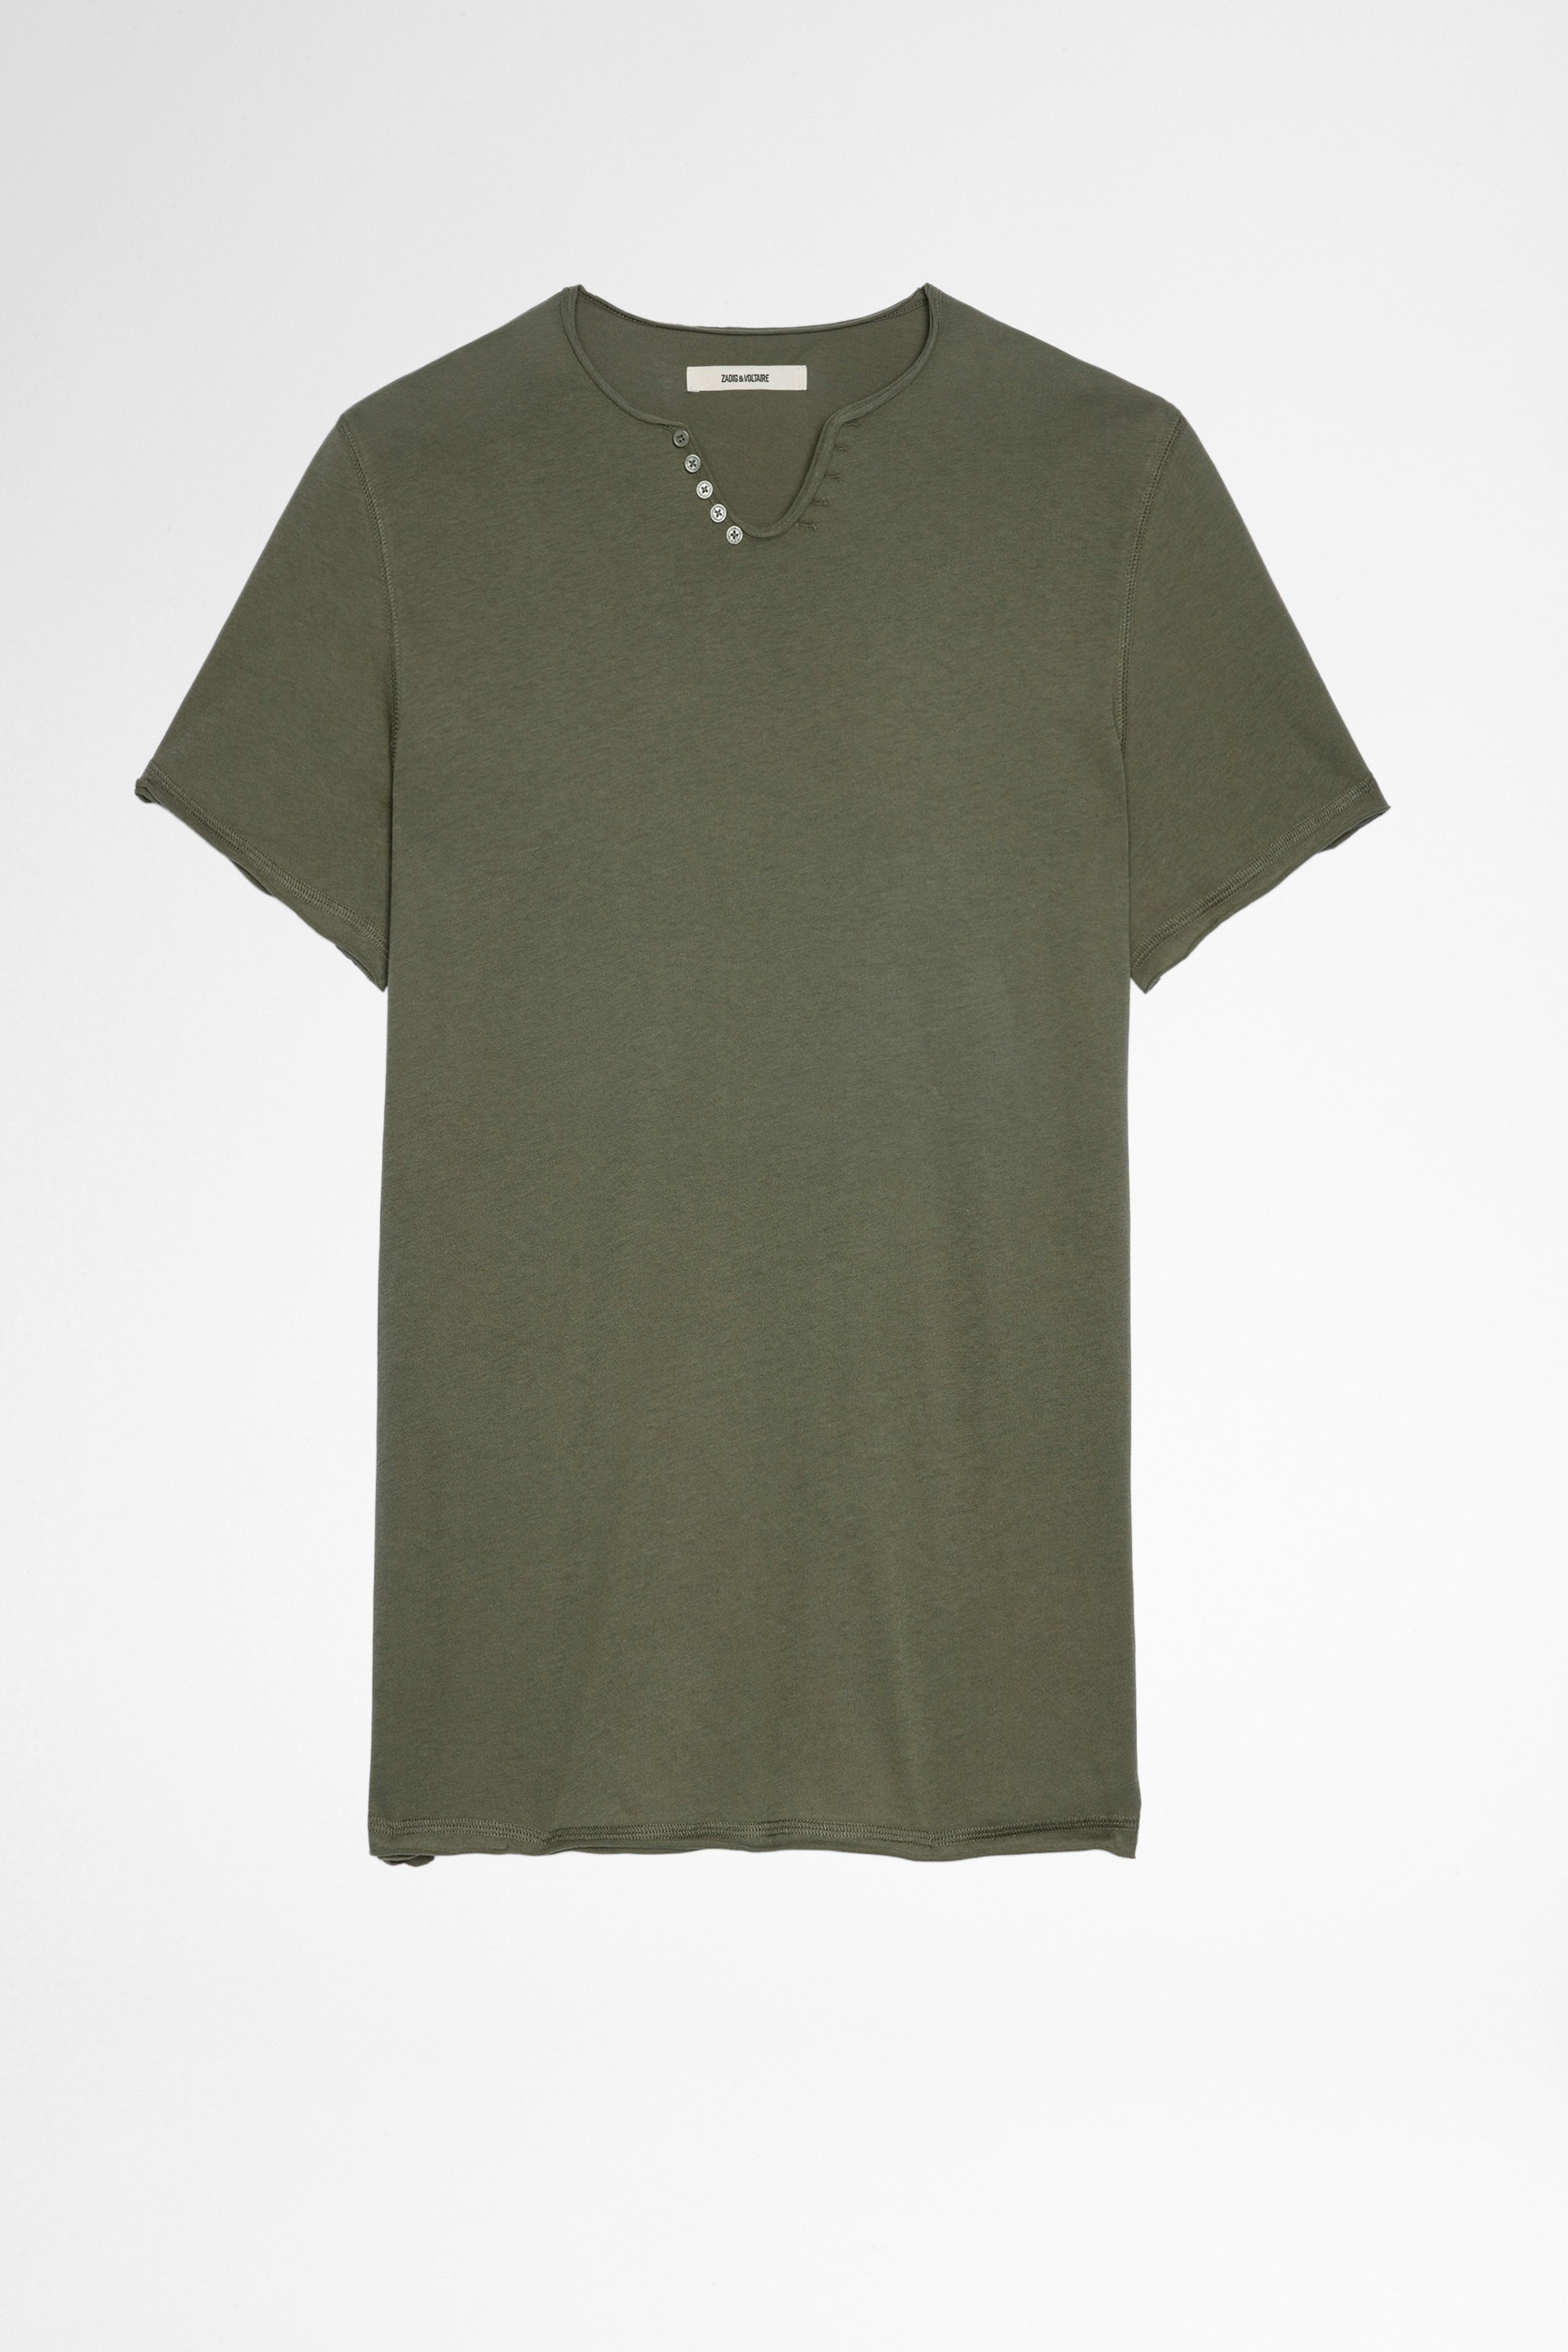 Monastir T-shirt Men's khaki cotton Henley T-shirt. This product is GOTS certified and made with fibers from organic farming.